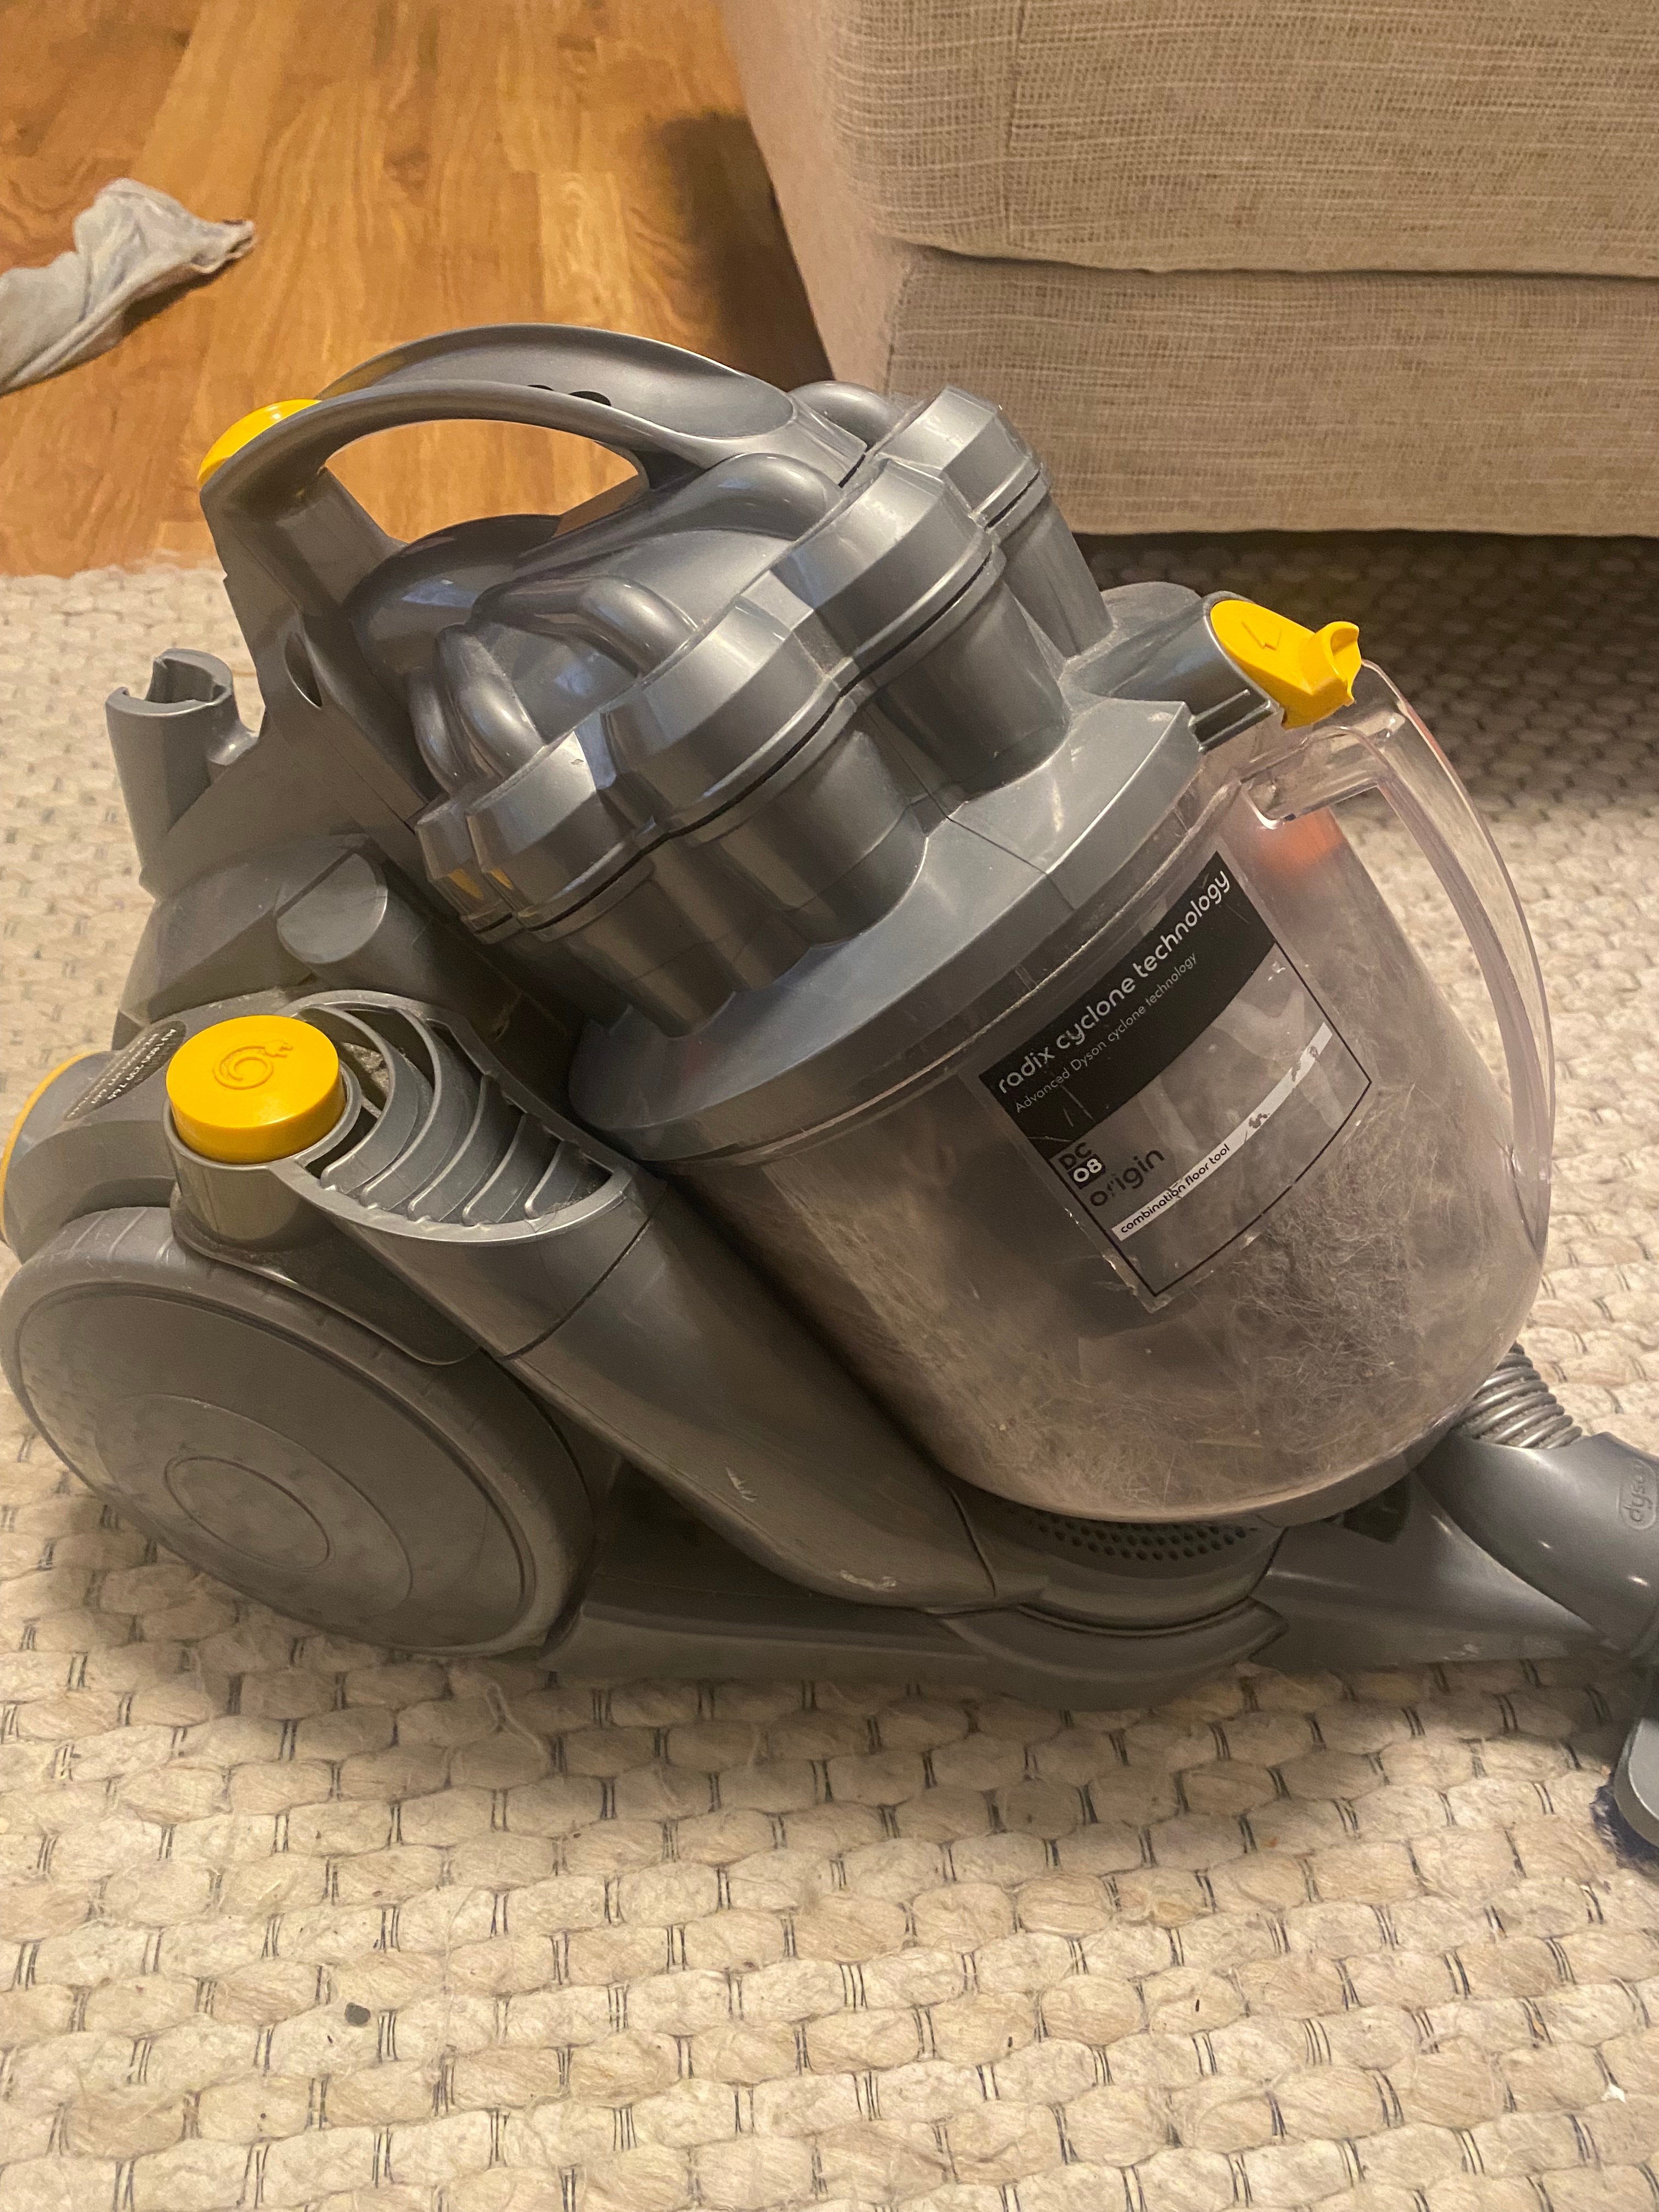 Corded Barrel - Unable to remove the - Help Dyson Community